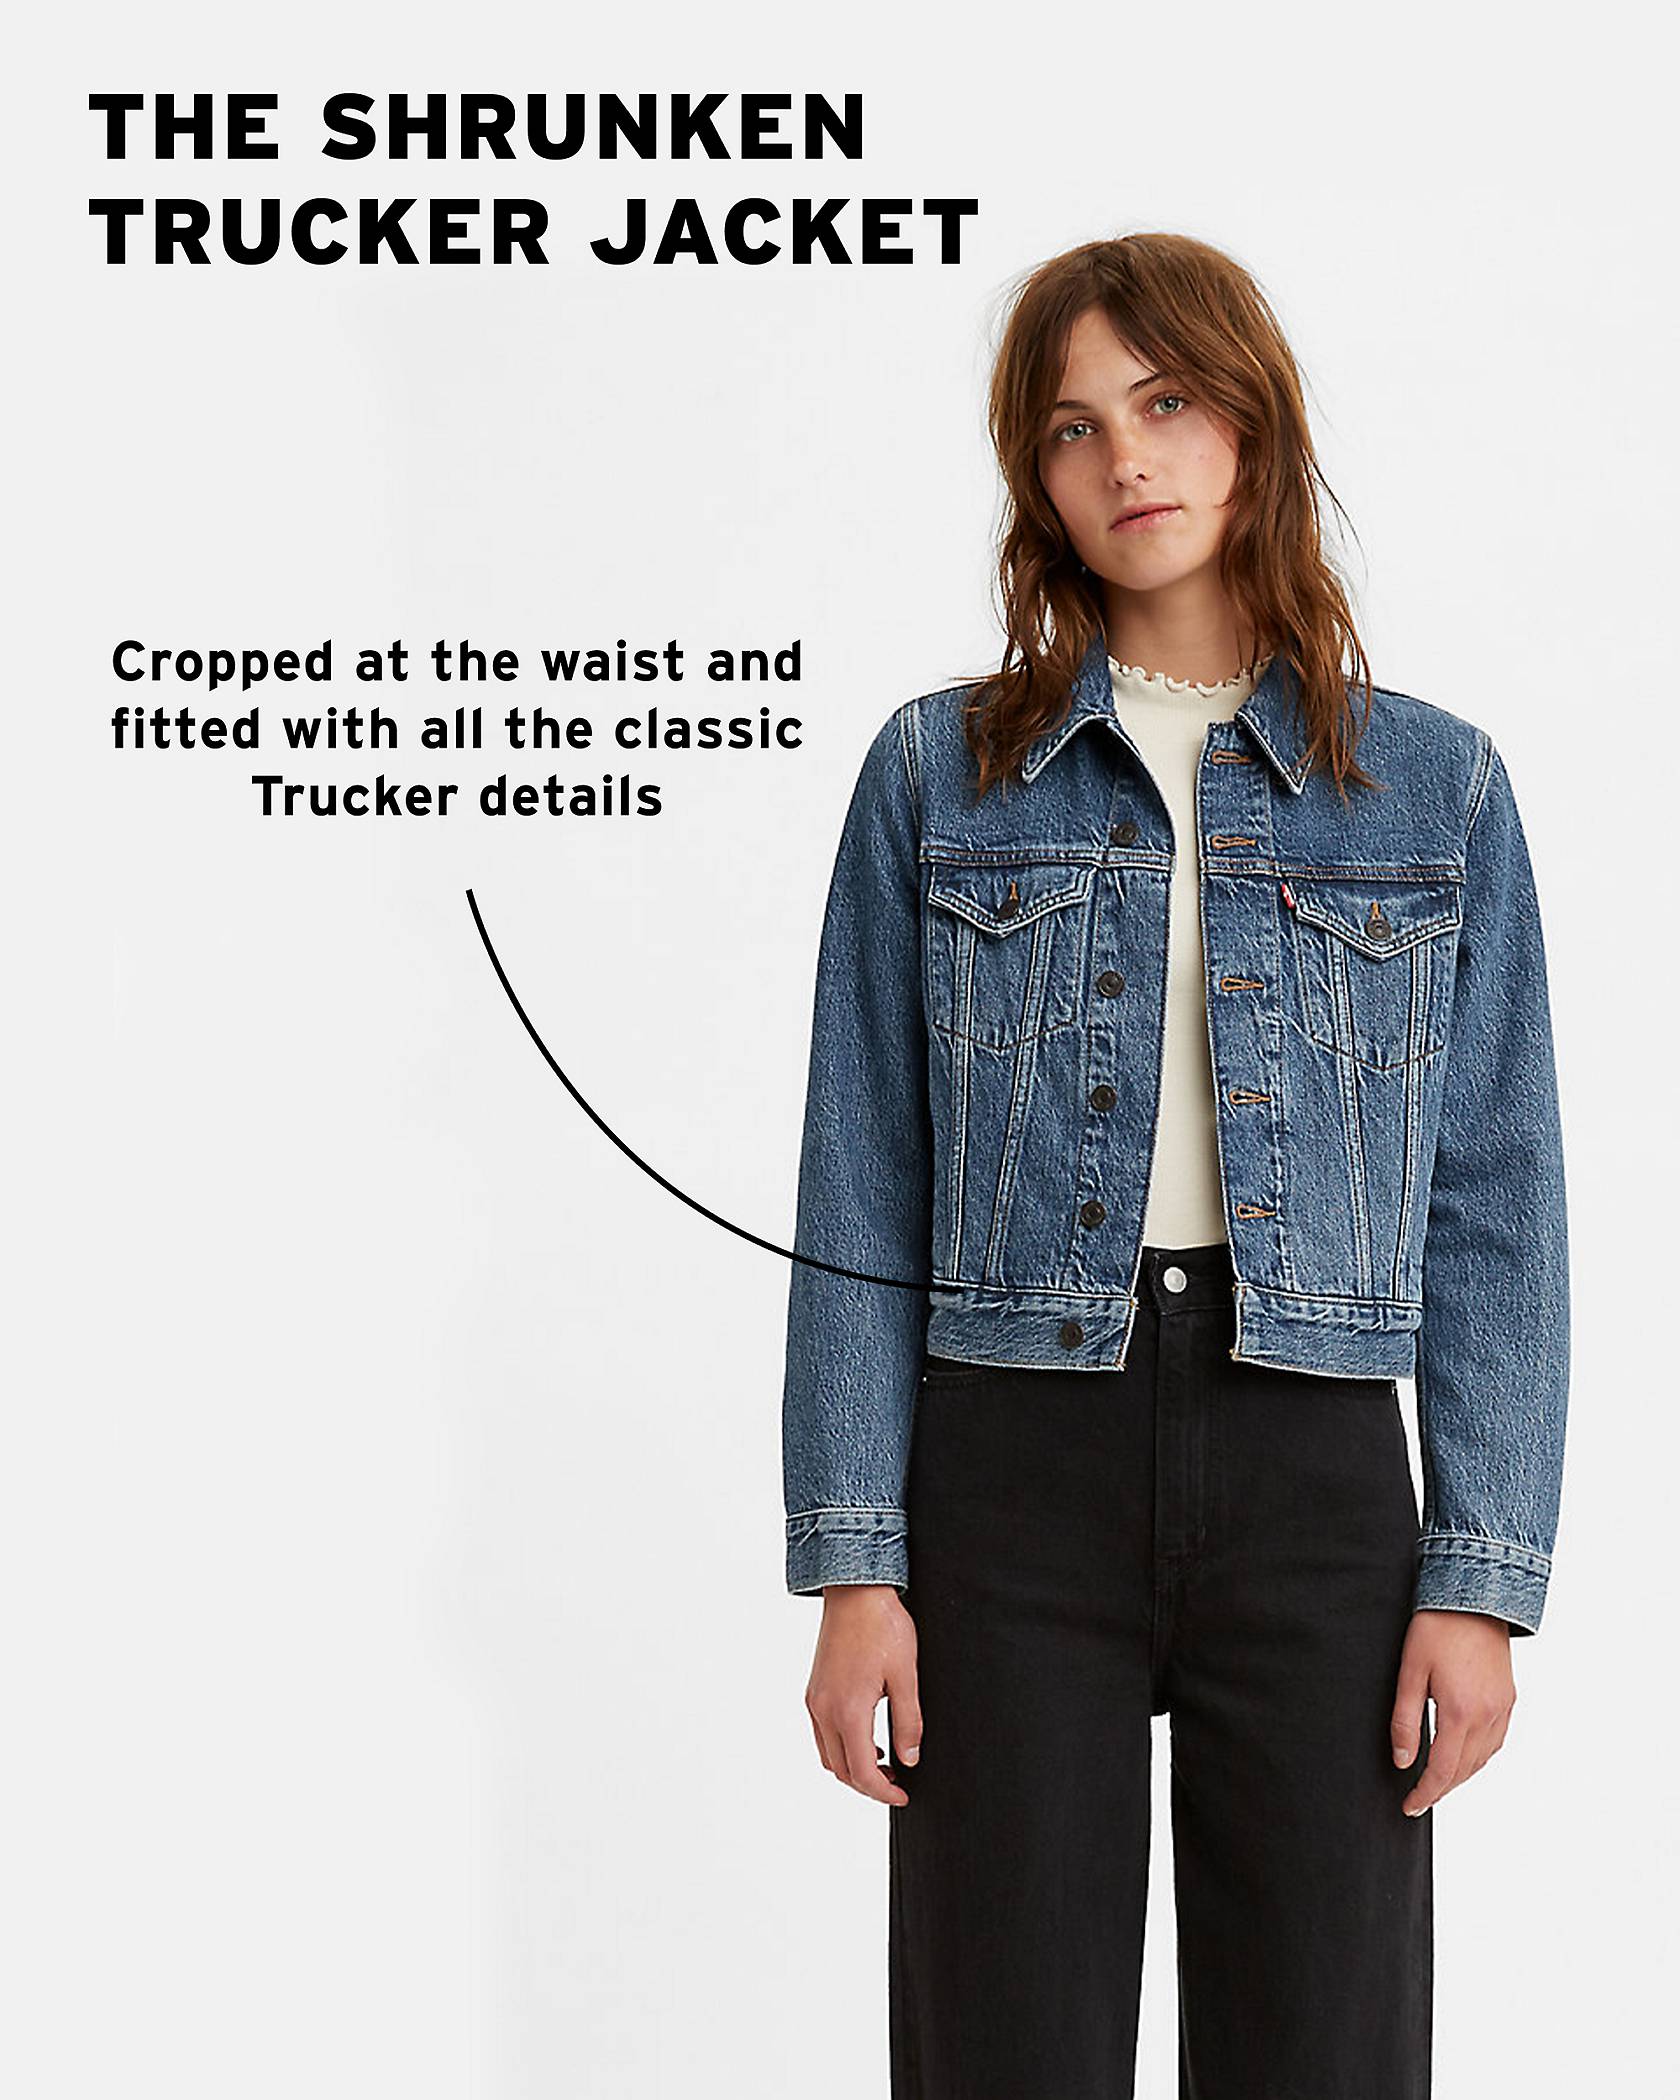 Model wearing Shrunken Trucker jacket with copy: "Cropped at the waist and fitted with all ofthe classic Original Trucker details, "